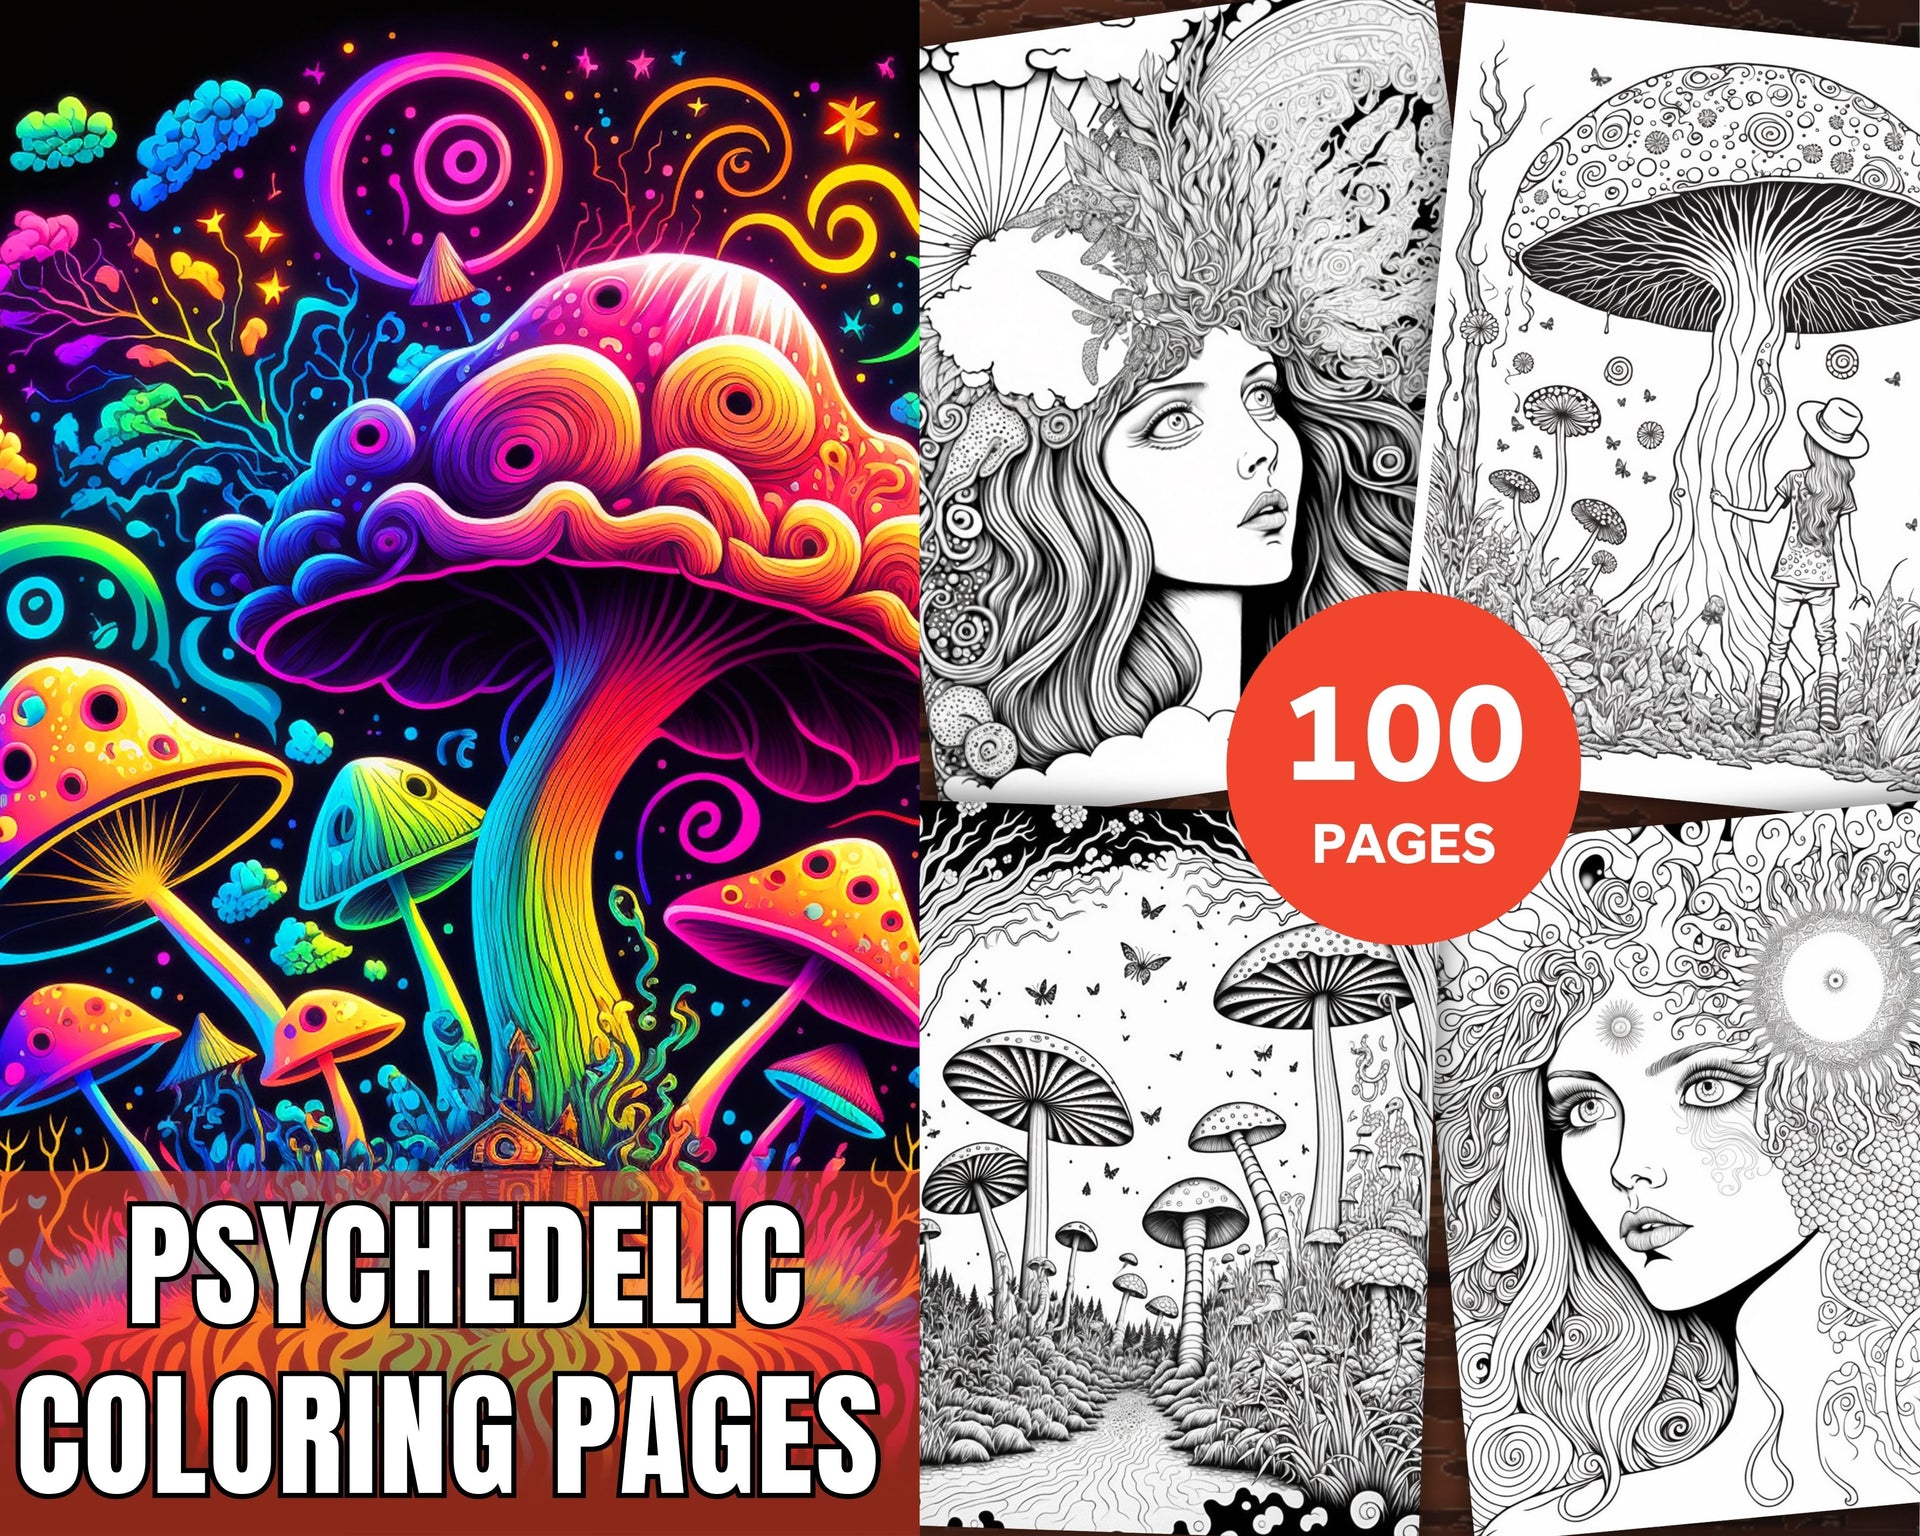 Psychedelic coloring pages printable for adults trippy coloring p â coloring